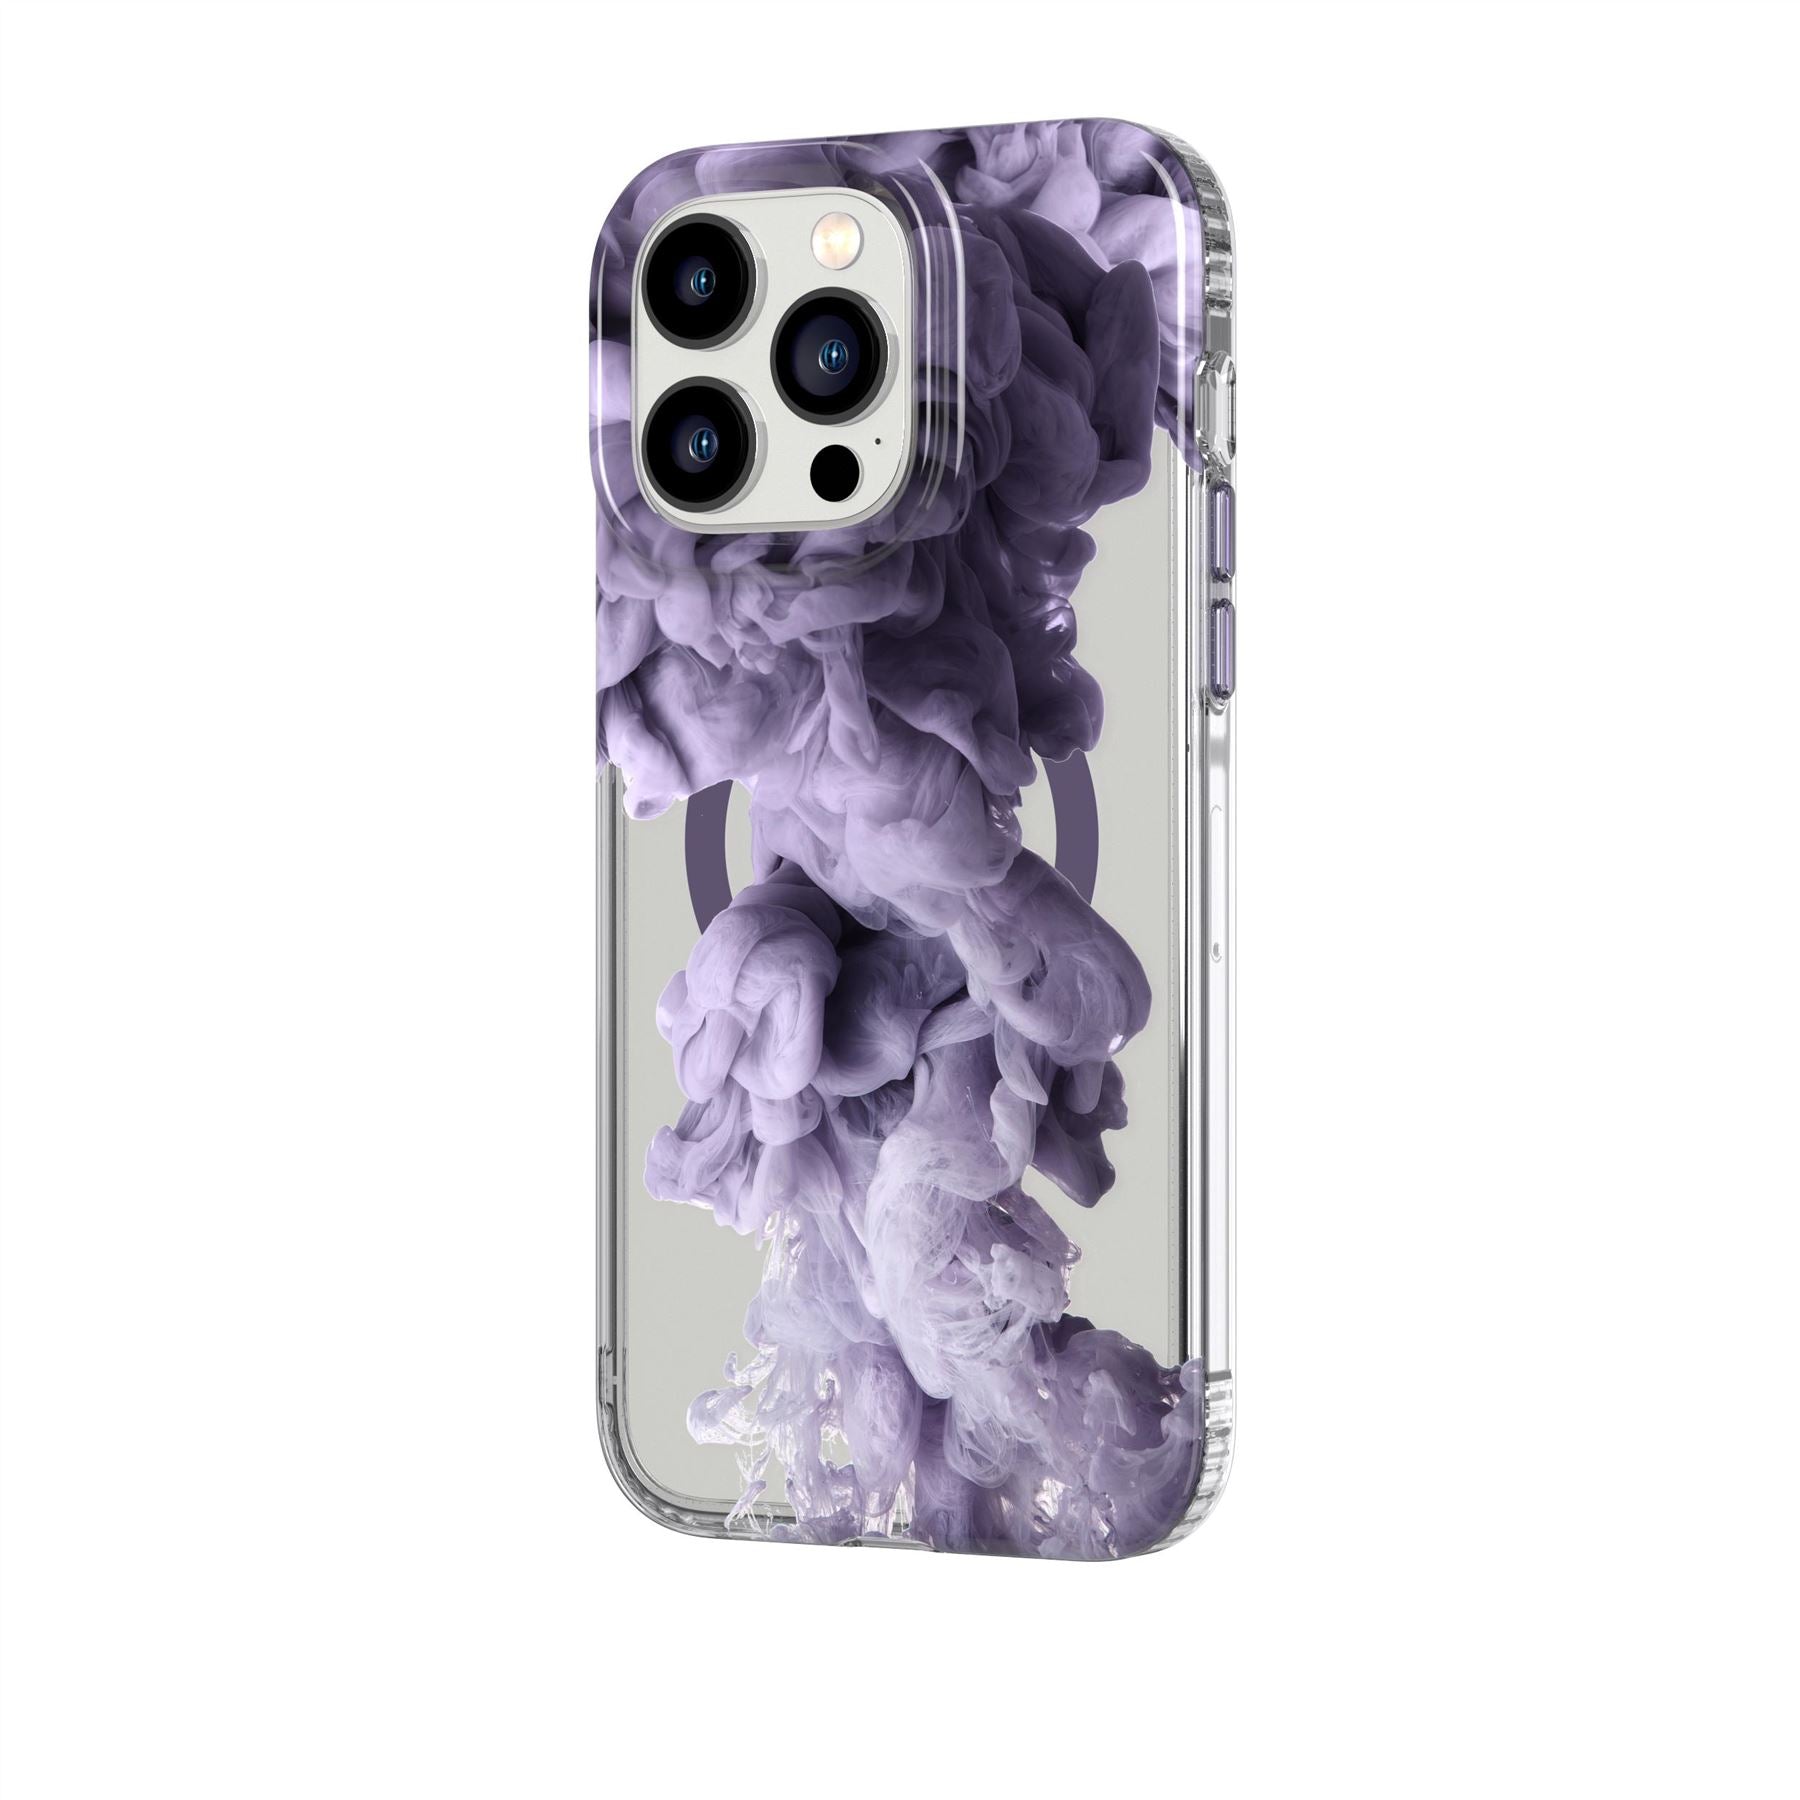 Evo Art - Apple IPhone 14 Pro Max Case MagSafe® Compatible - Clouded Dusk